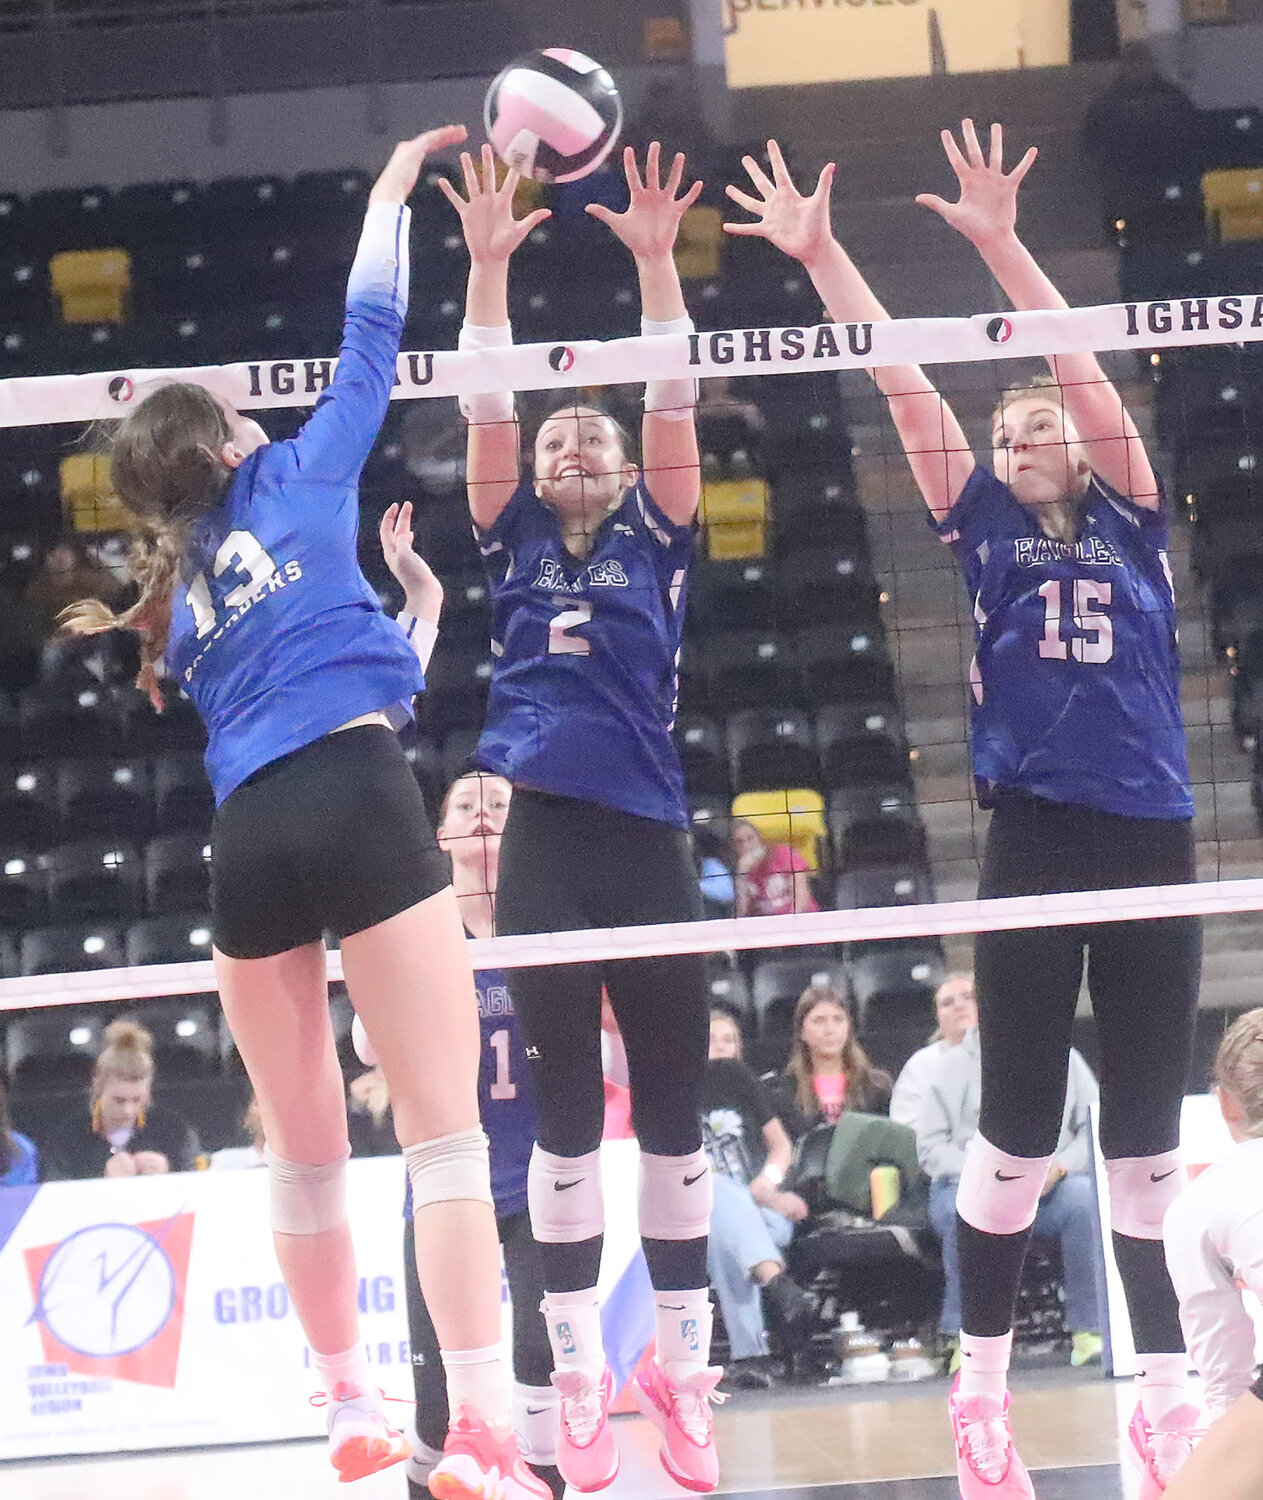 Mary Kate Bendlage goes for a kill against the Eagles front line defense in the third set Thursday night at Xtream Arena in Coralville